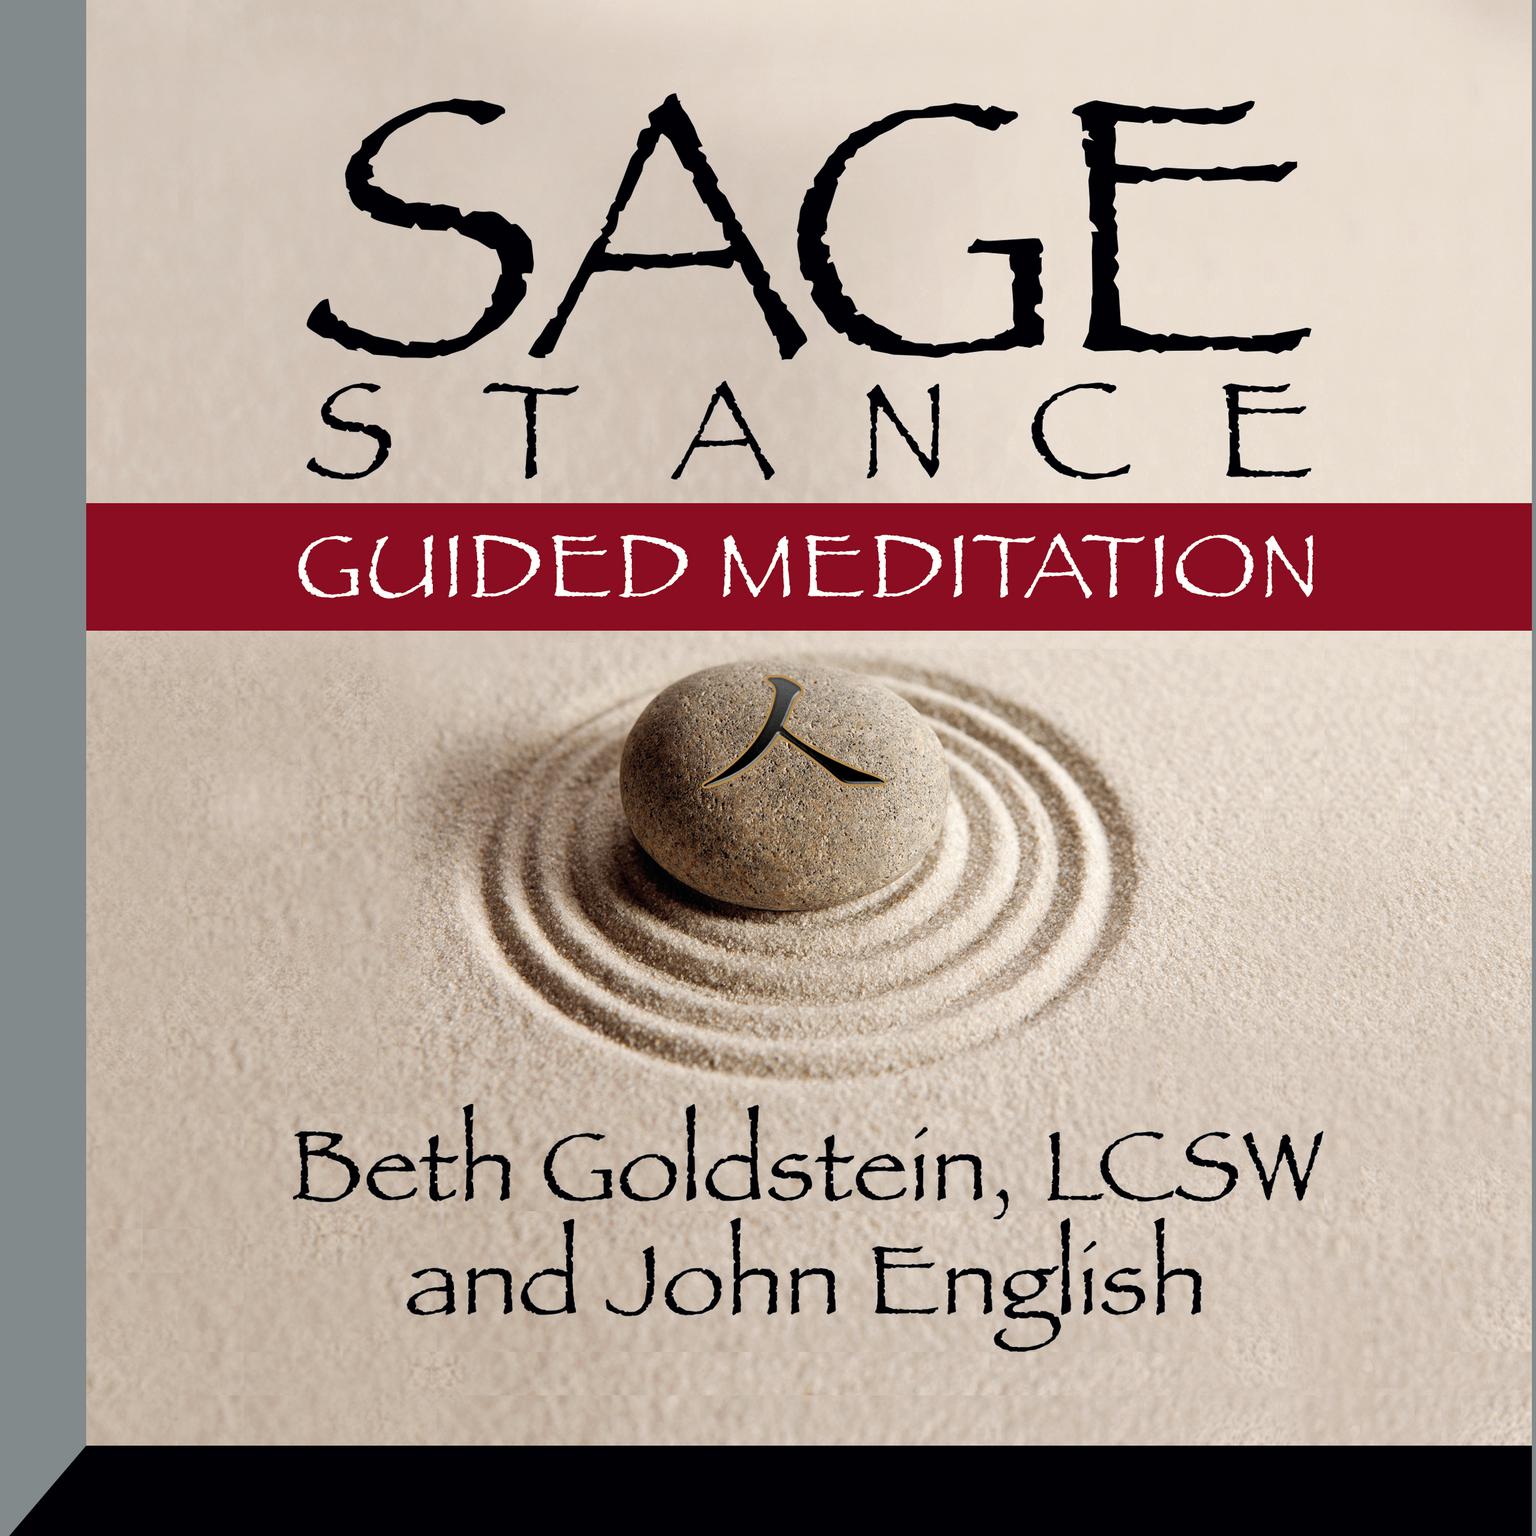 Sage Stance Guided Meditation Audiobook, by Beth Goldstein